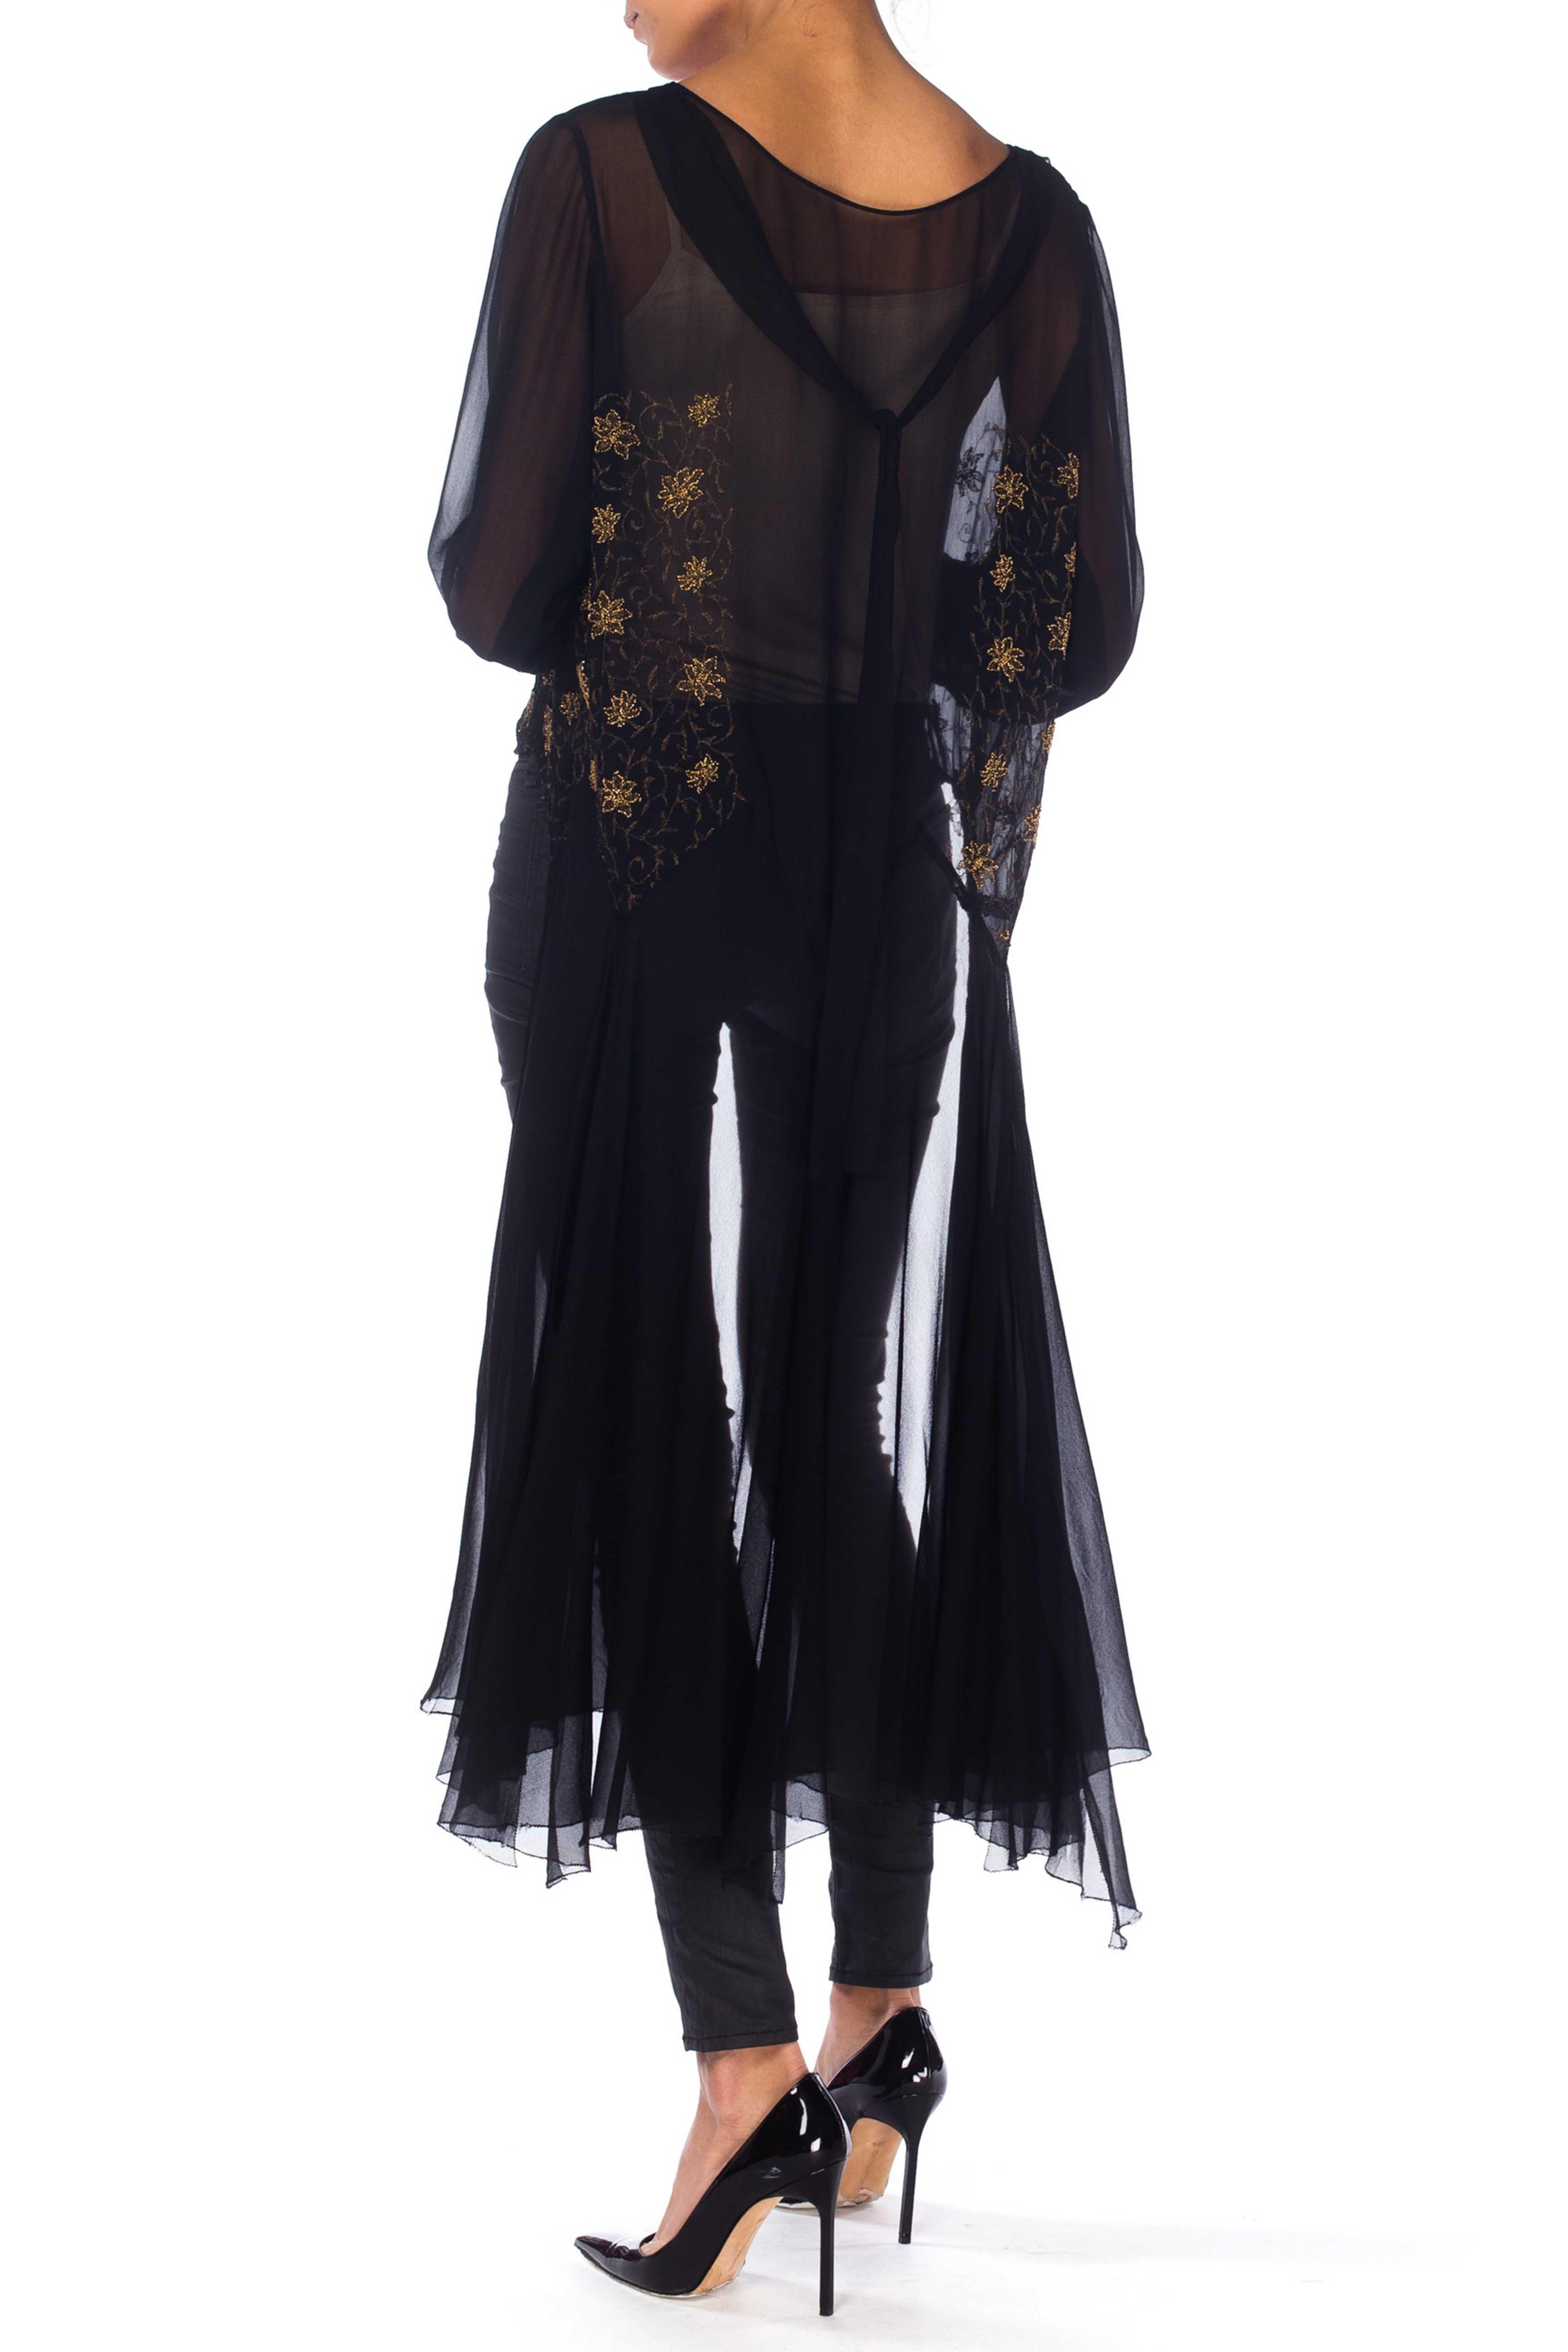 1920S Black Silk Chiffon Over Dress With Gold Embroidery & Beading For Sale 3